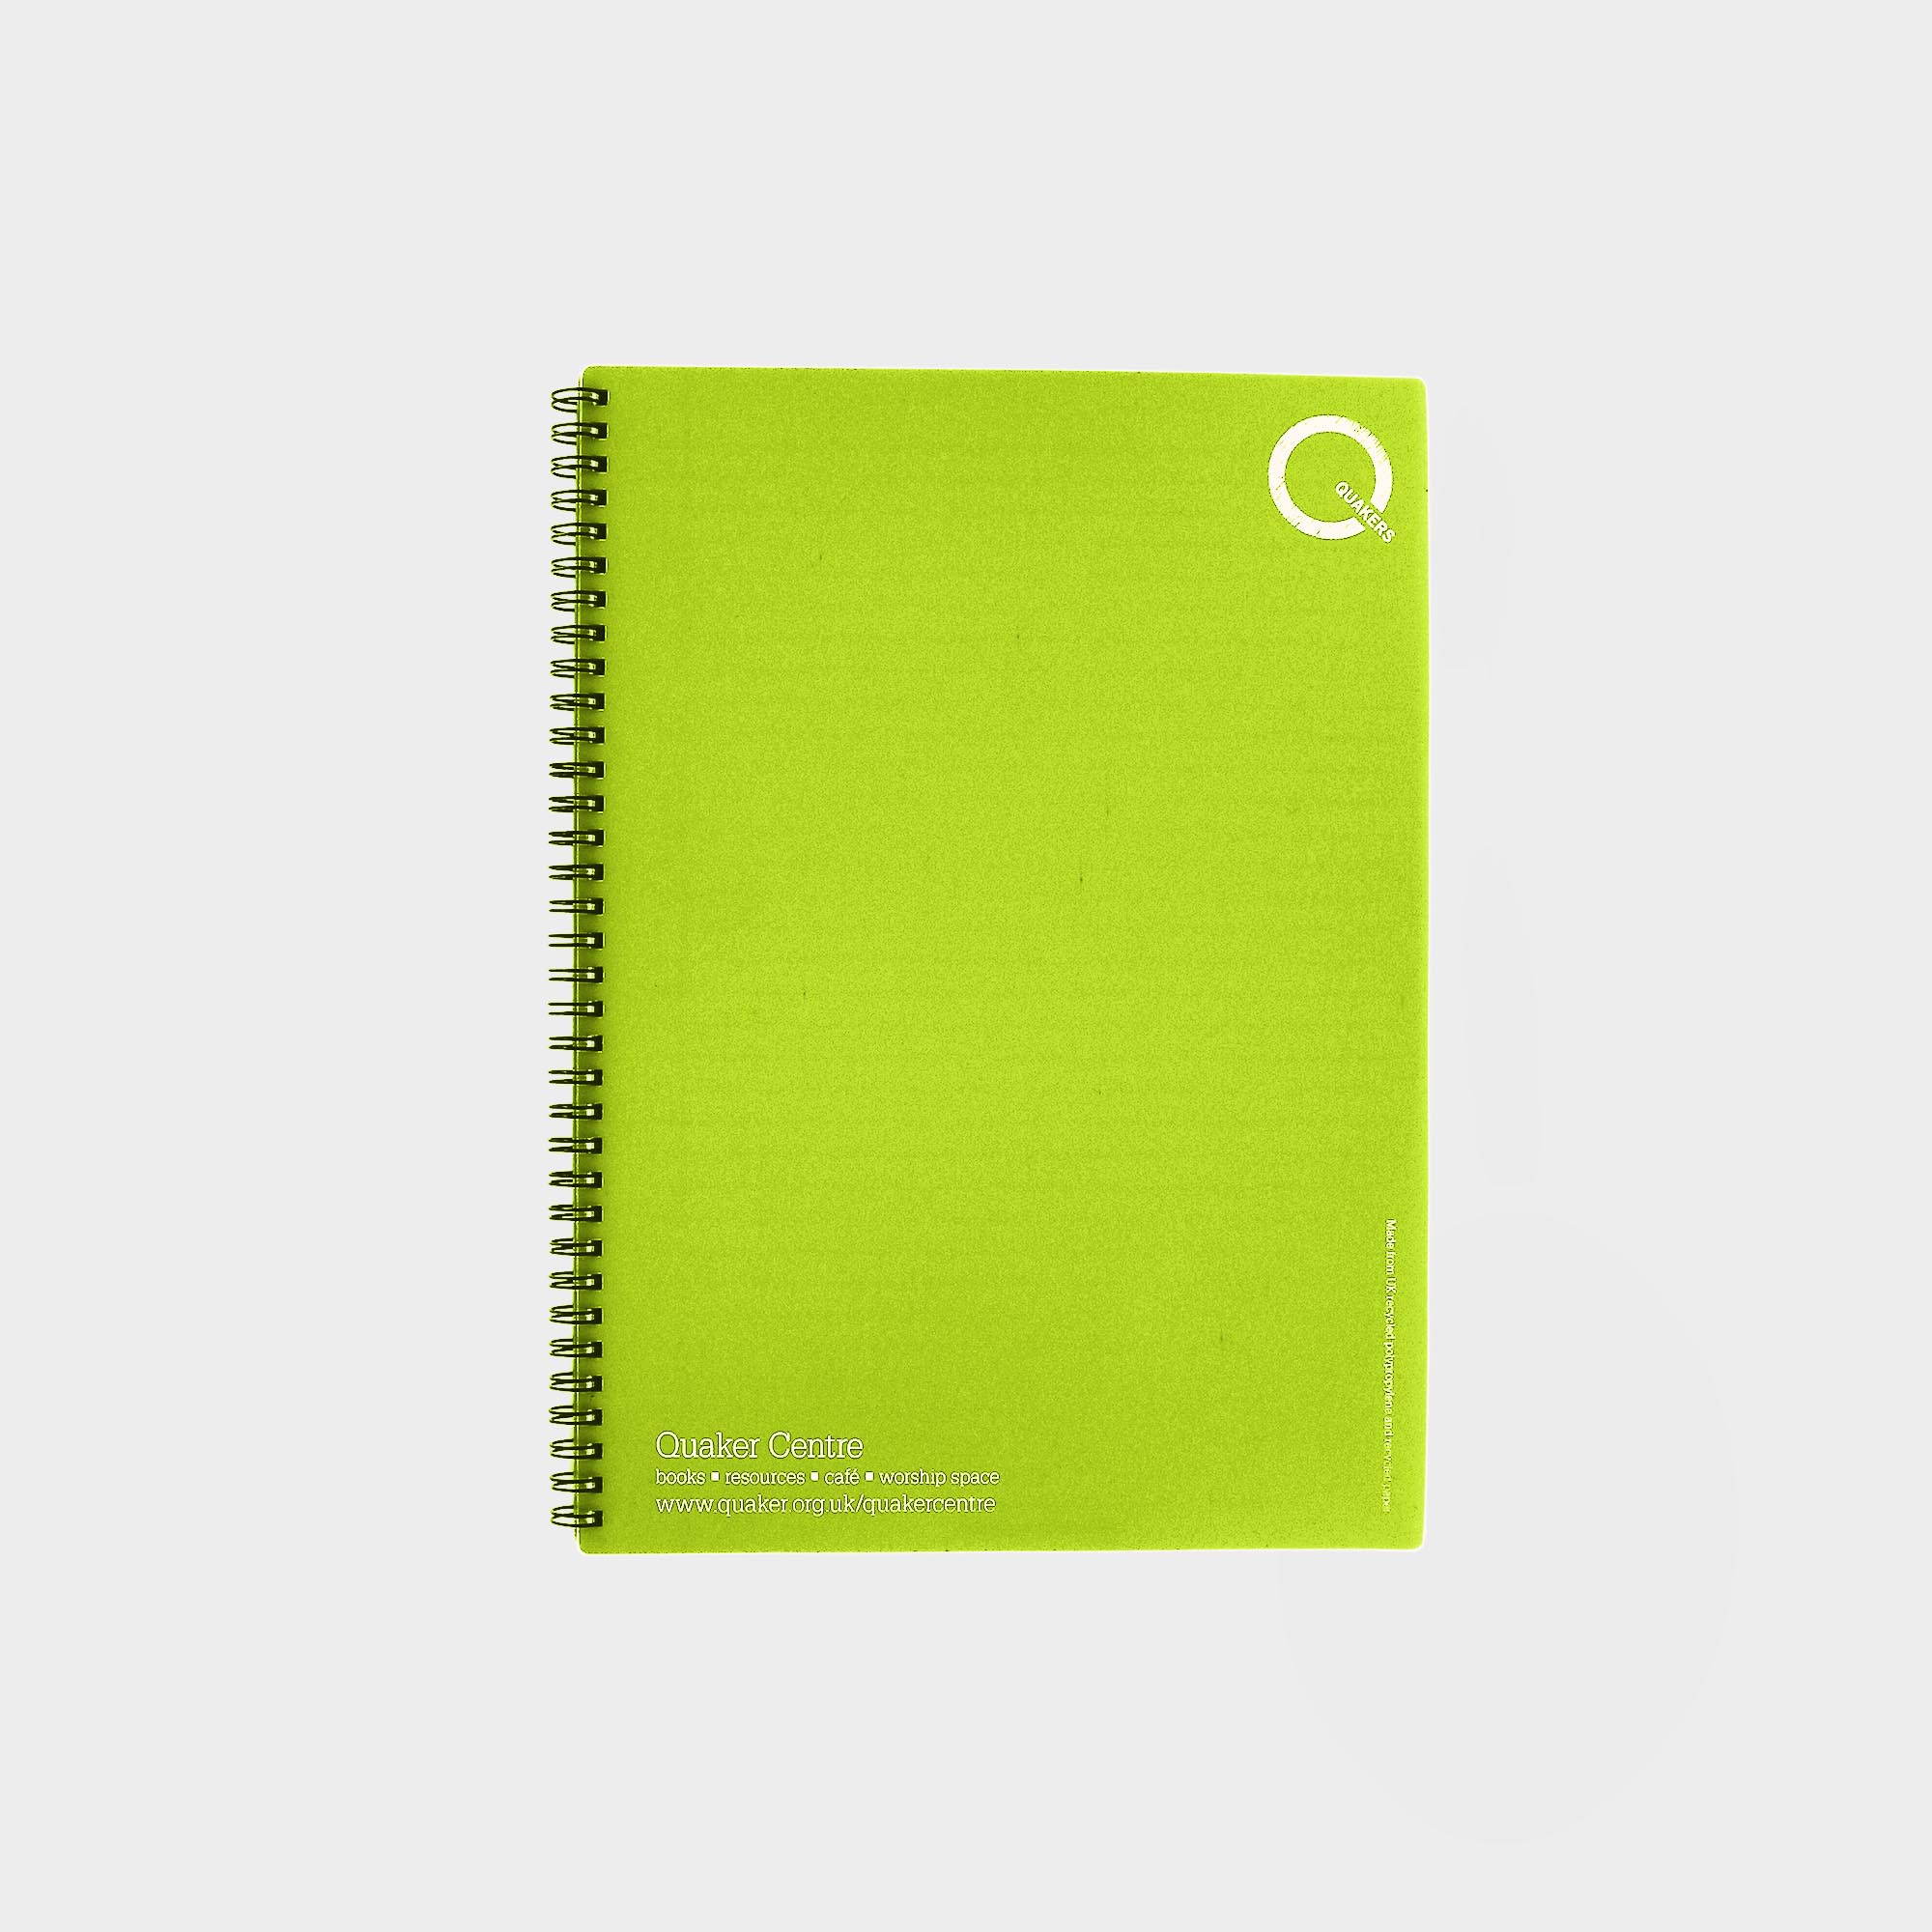 The Green & Good Polypropylene Notebook comes with recycled paper - size A4. The front and back cover is made from recycled polypropylene (500 microns), the sheets are 80gsm. Comes wirebound with 50 sheets as standard. Please contact us if you require a bespoke number of sheets. Light Green